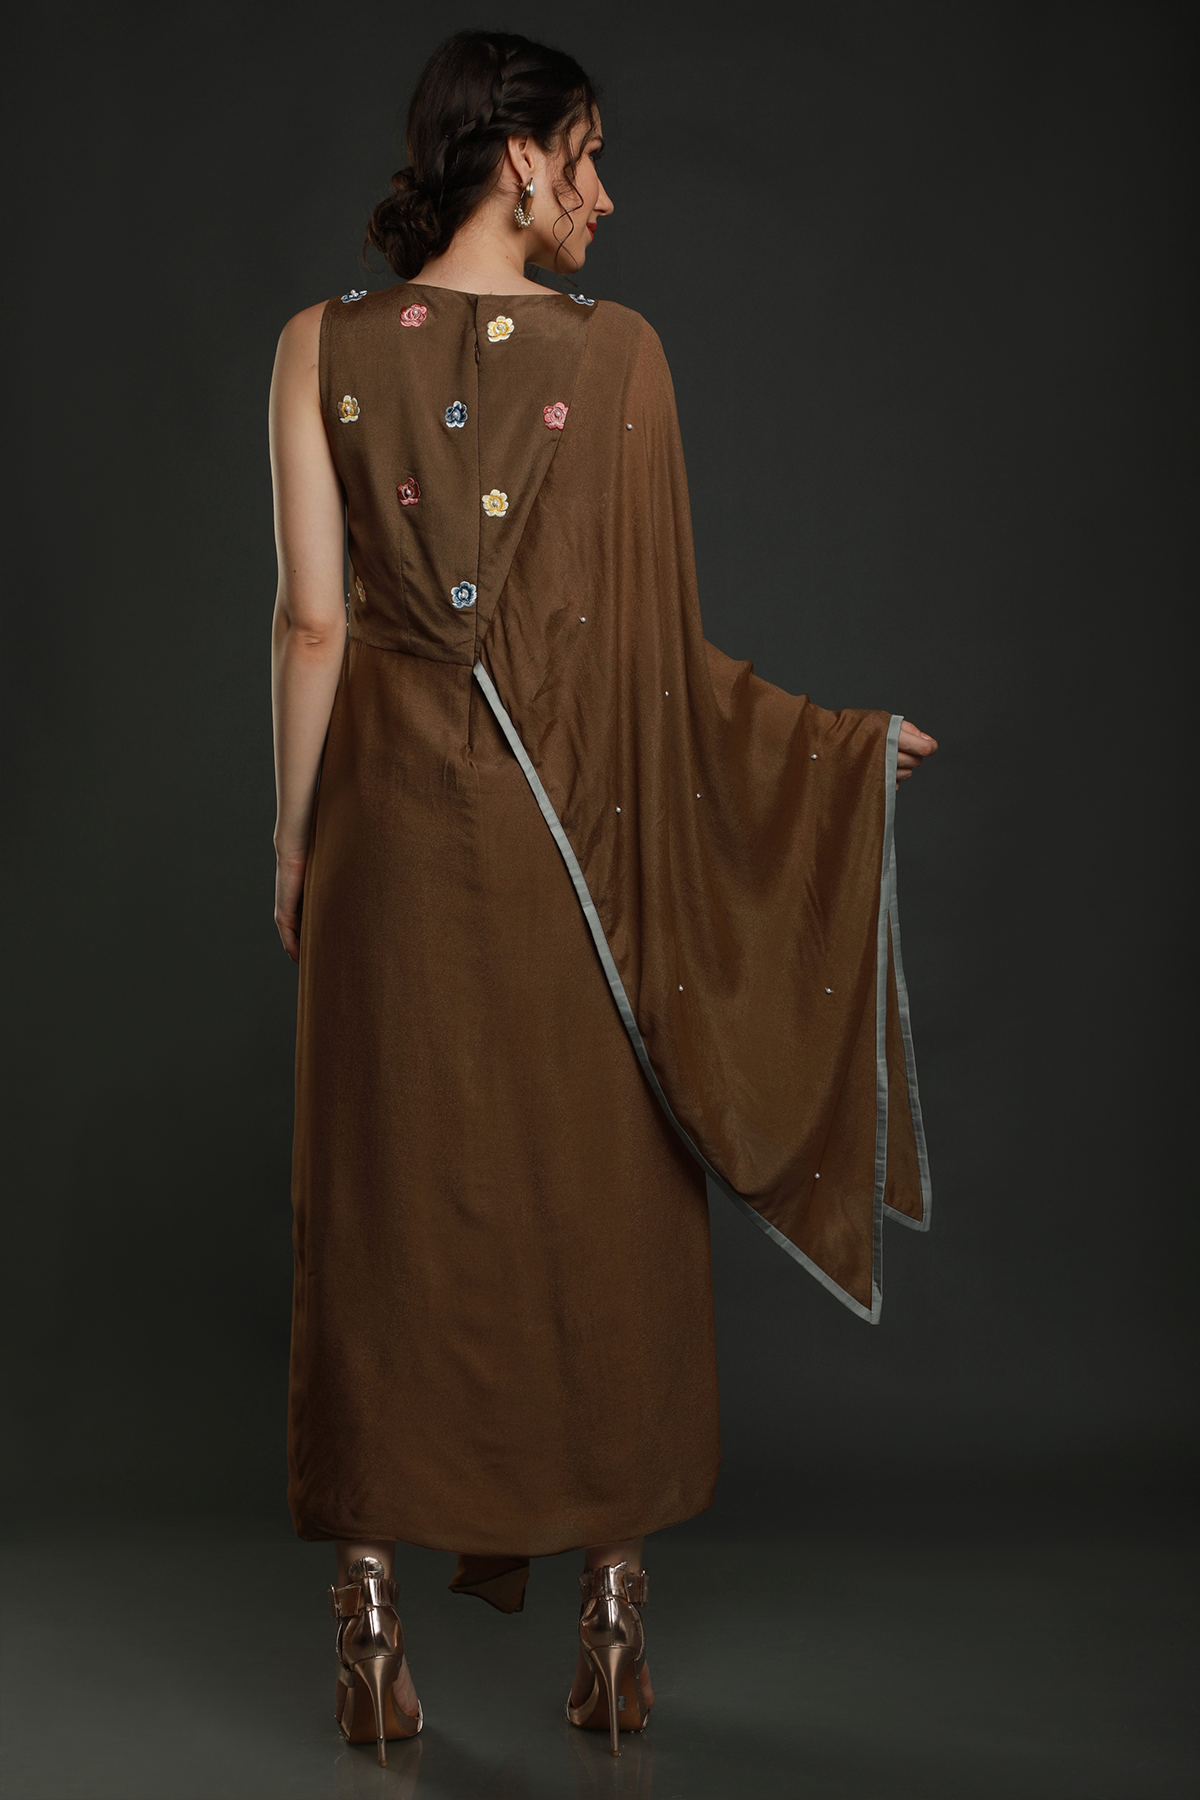 "Charming Tan Teddy Bear Crepe Dhoti Drape with Falling Pallu Sleeves, adorned with Thread, Cutdana, and Pearl Work Yoke. Shop this unique style!"